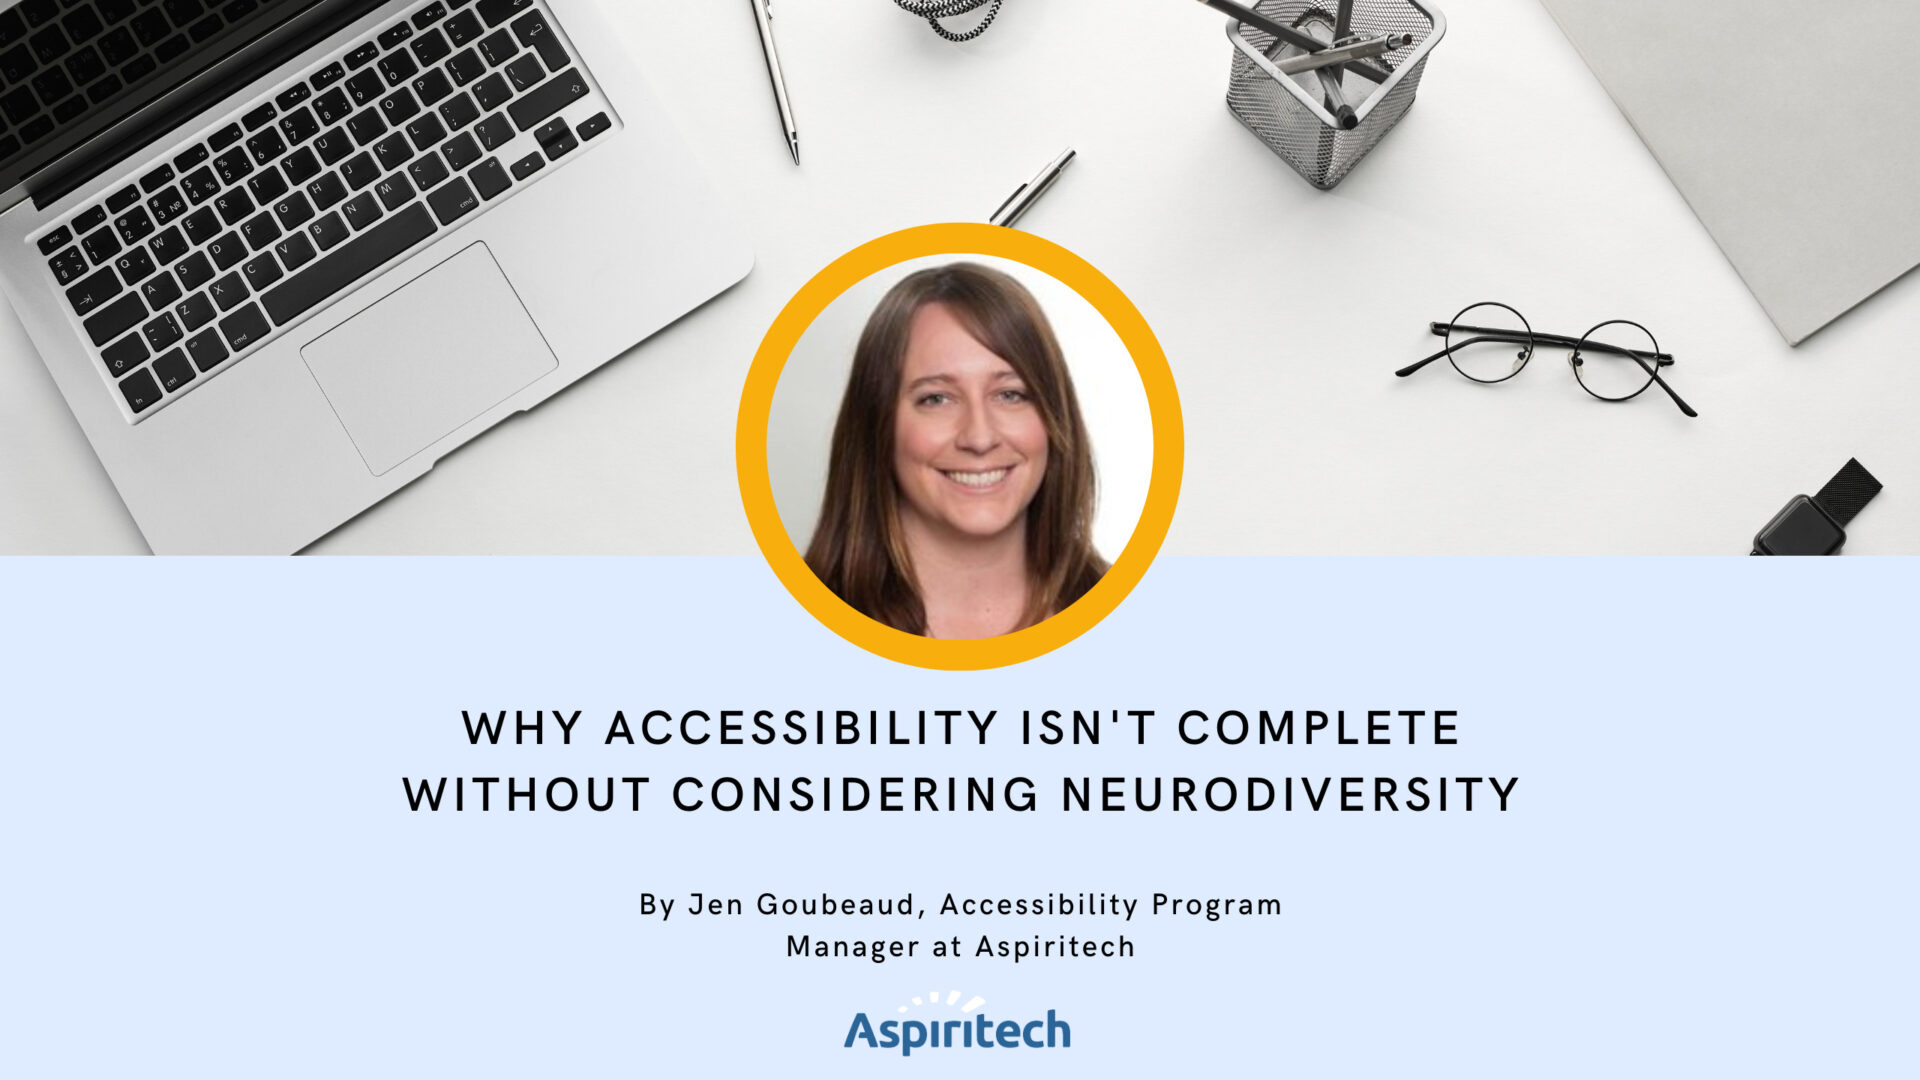 Why Accessibility Isn’t Complete Without Considering Neurodiversity